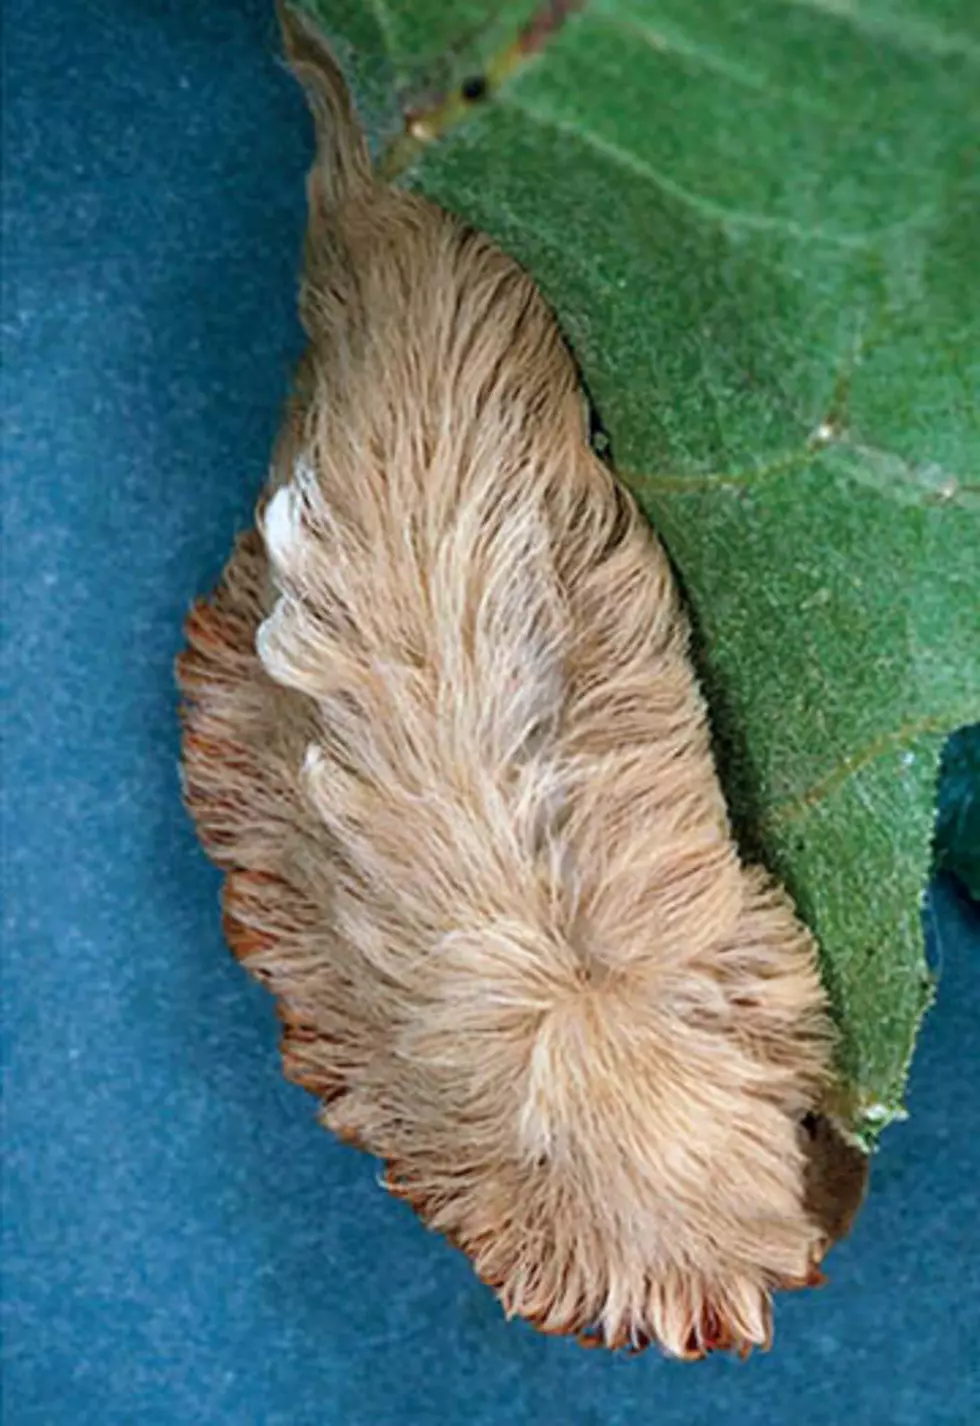 This LA Caterpillar is Named &#8220;Puss Moth&#8221; and it&#8217;s No Joke